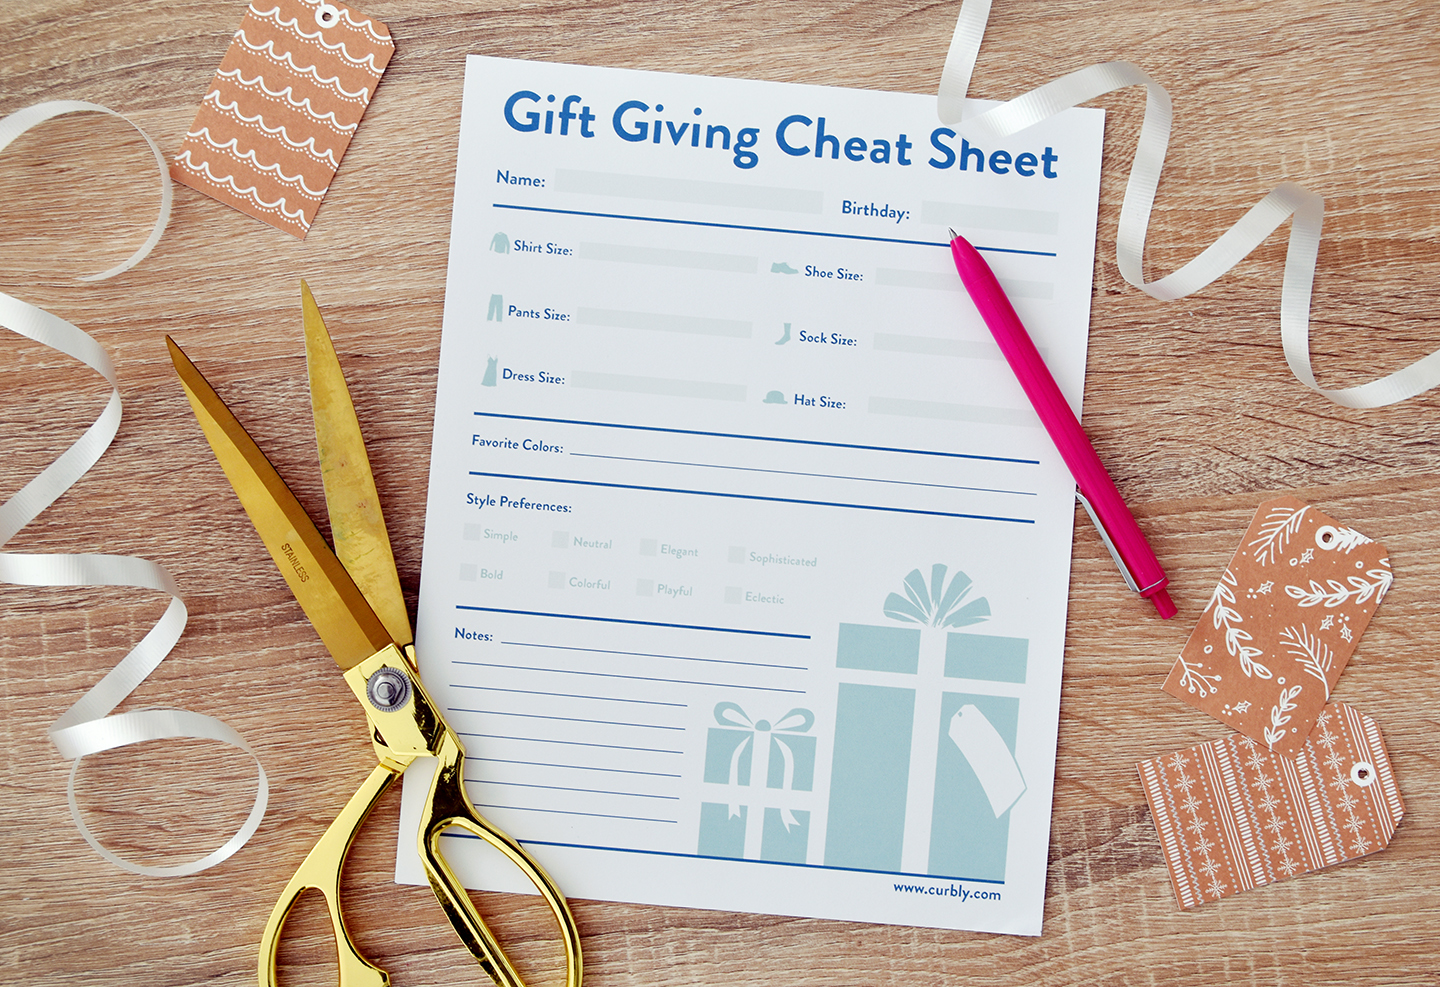 Printable gift giving sheet surrounded by scissors, ribbon, and a pen.